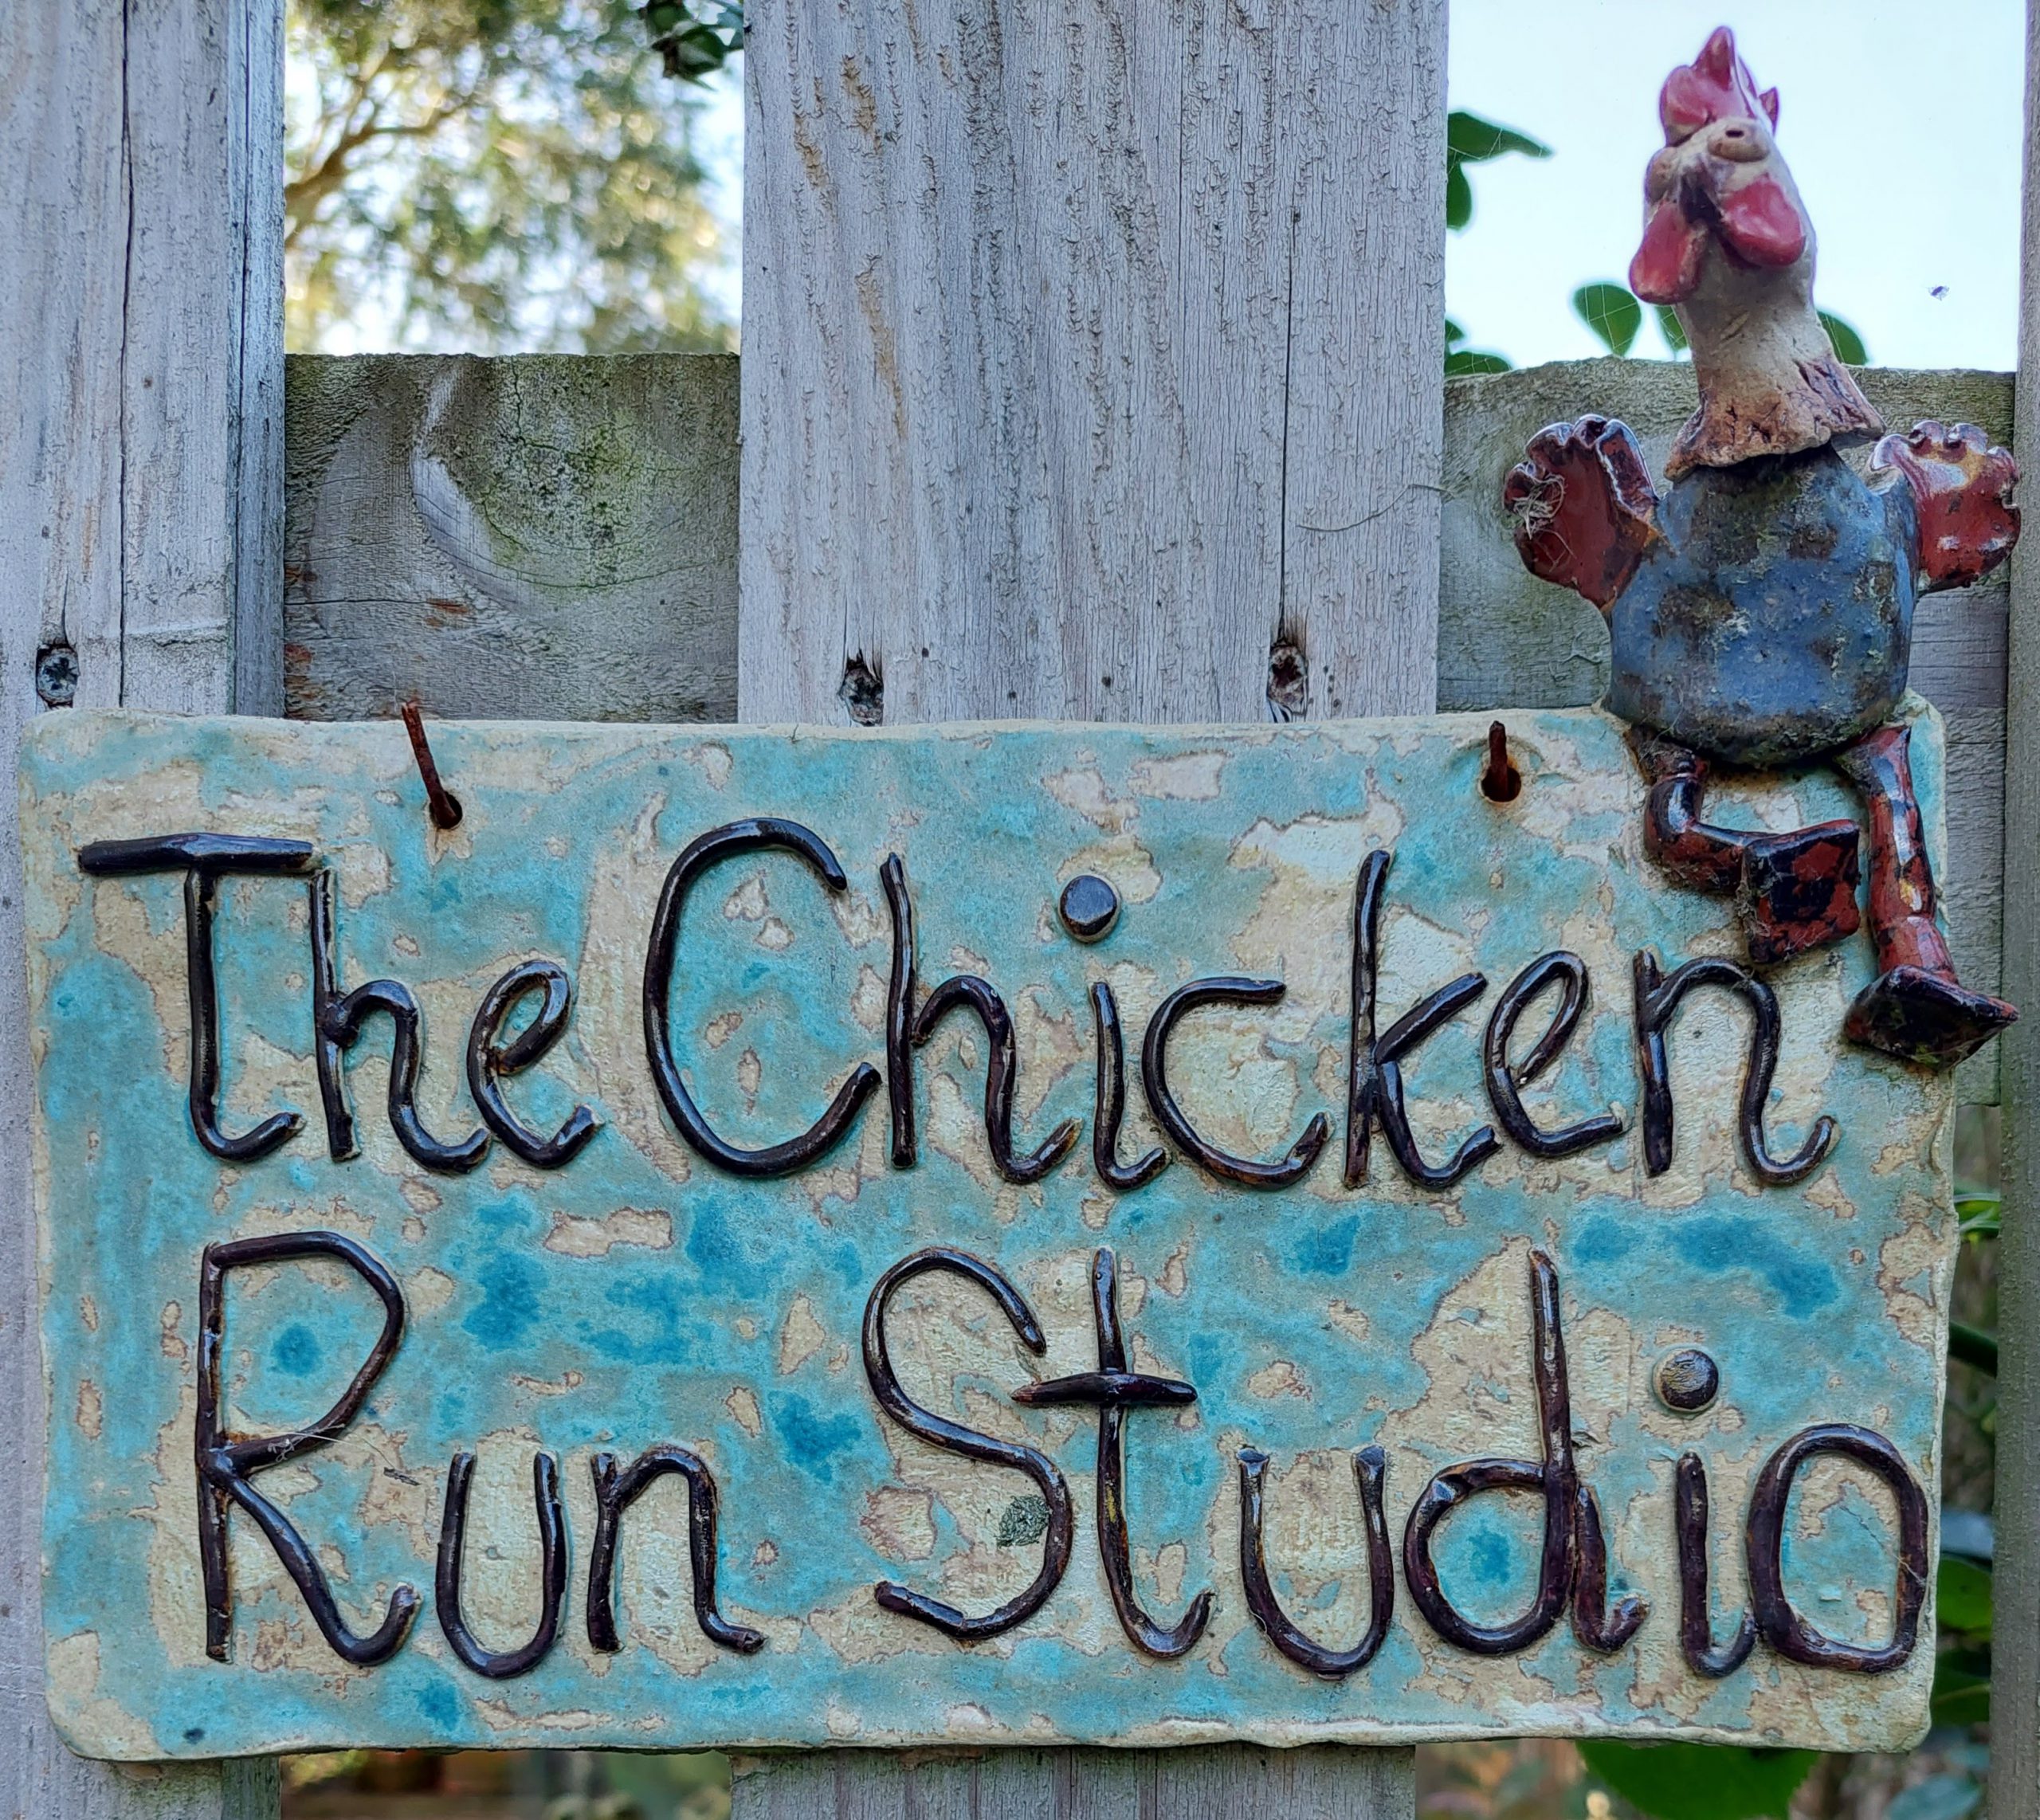 The Chicken Run Studio sign, made out of stoneware pottery, with a quirky stoneware chicken perched on the top.